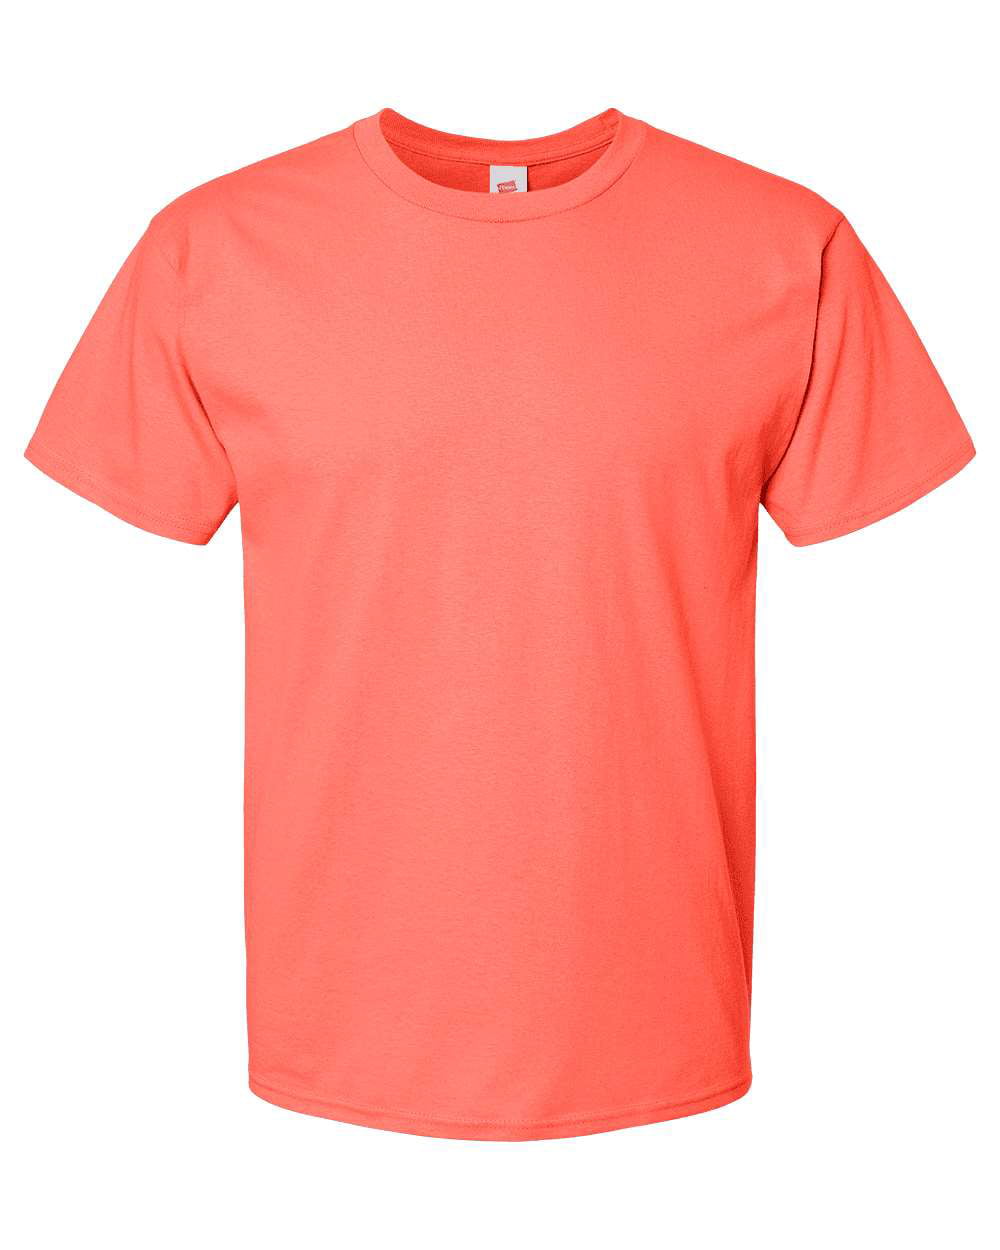 Got Cruise Mens Tee Shirt Pick Size Color Small-6XL